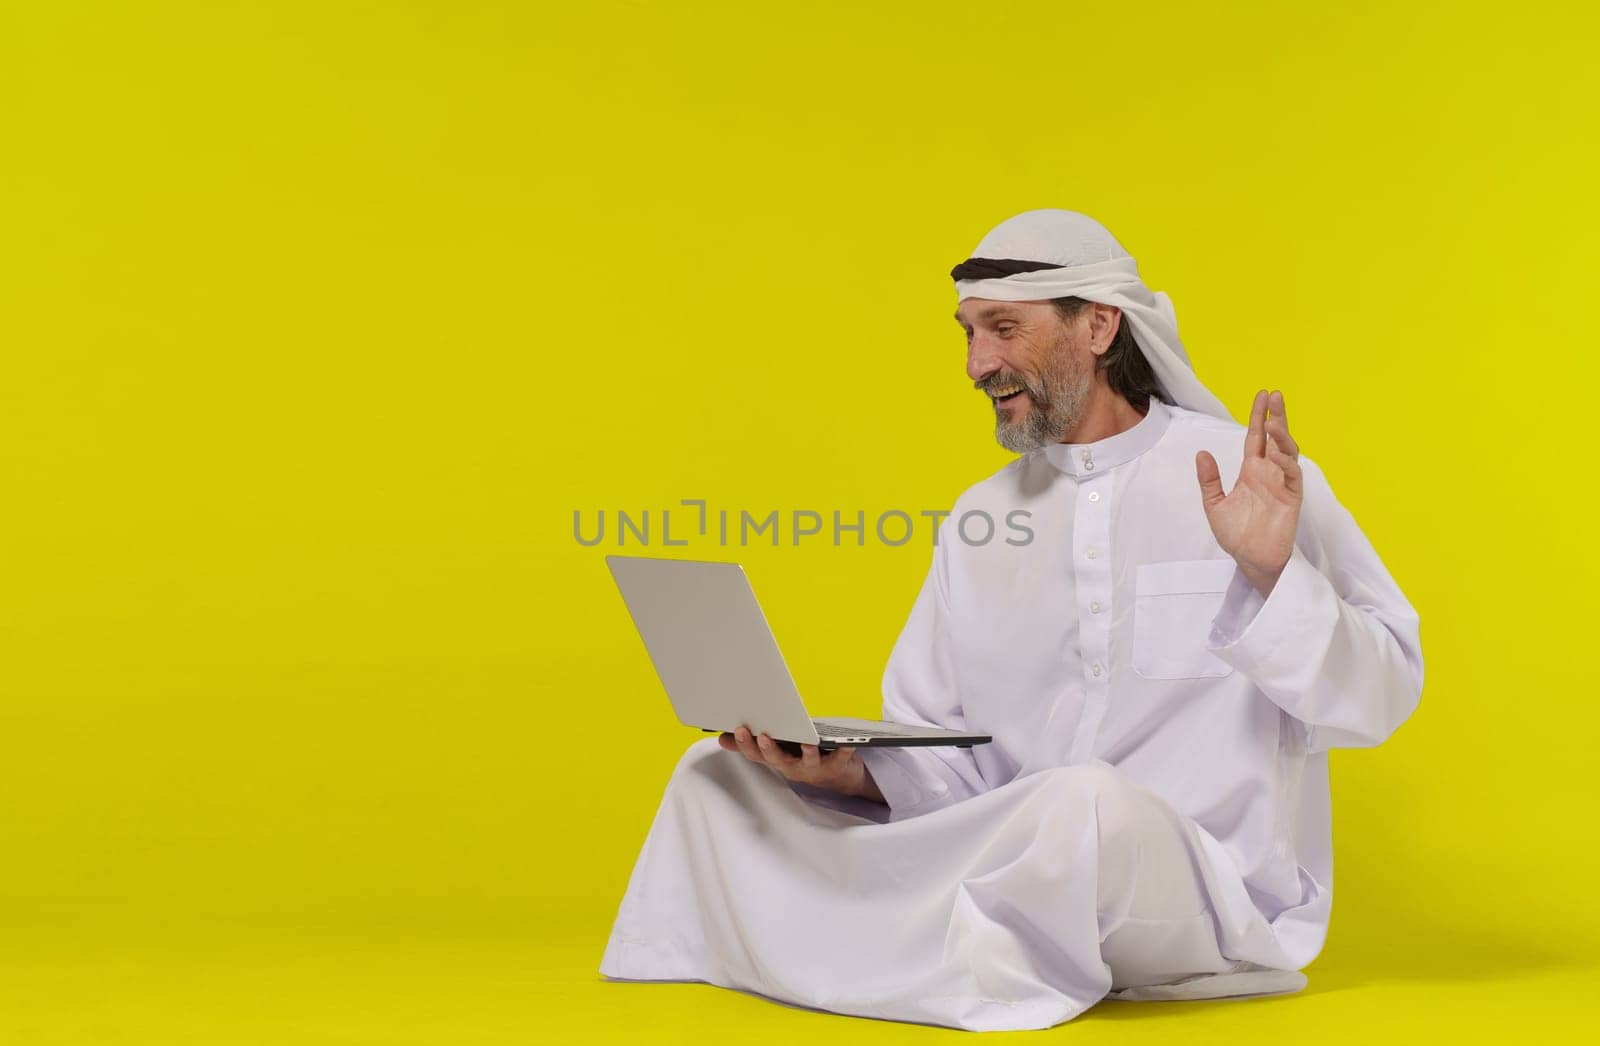 Concept online communication. Muslim person sitting on floor greets someone with their palm raised while holding a laptop in their hand. Copy space allows for easy customization and versatility and global connection through technology. by LipikStockMedia